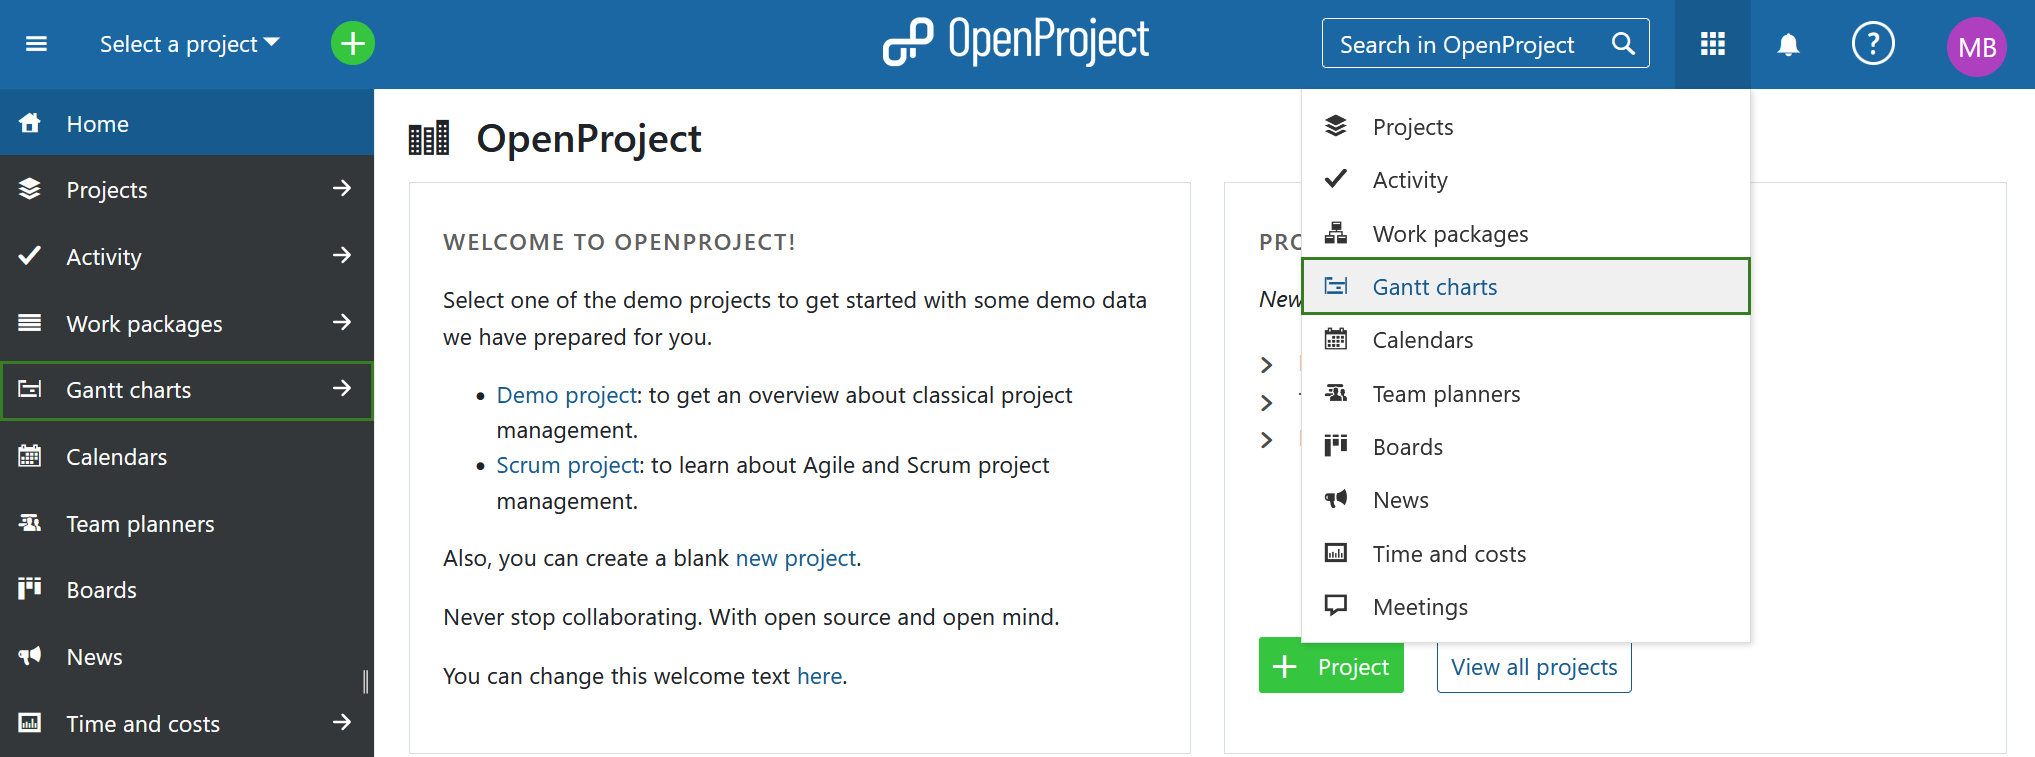 Select Gantt charts from the global modules menu in OpenProject